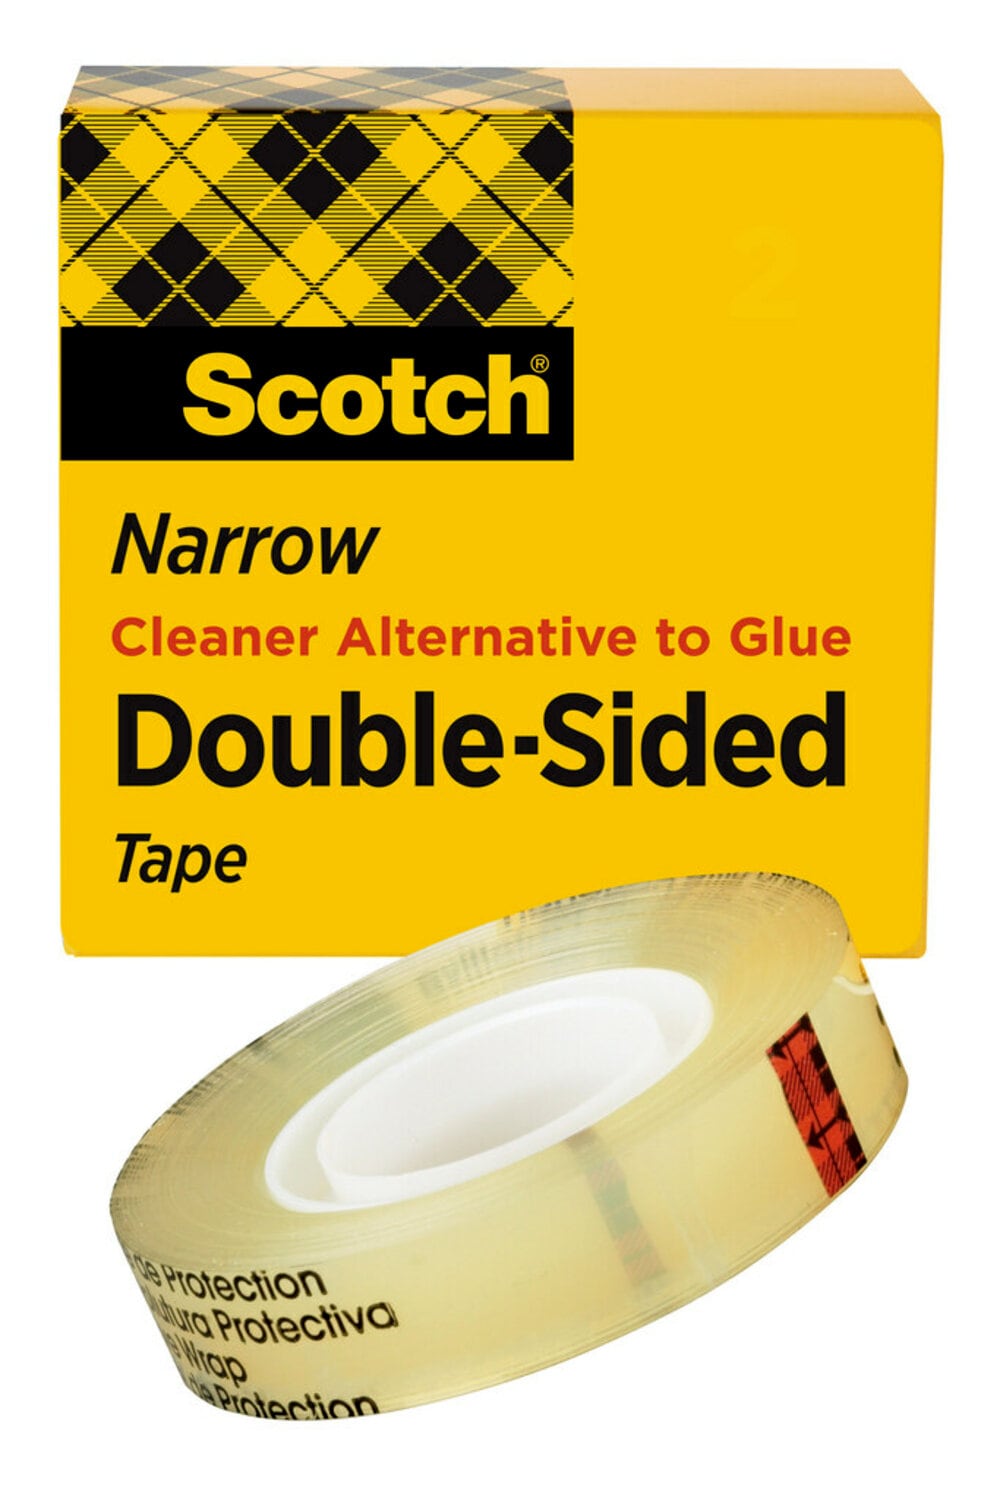 7000050055 - Scotch Double Sided Tape 665, 1/2 in x 900 in, Boxed